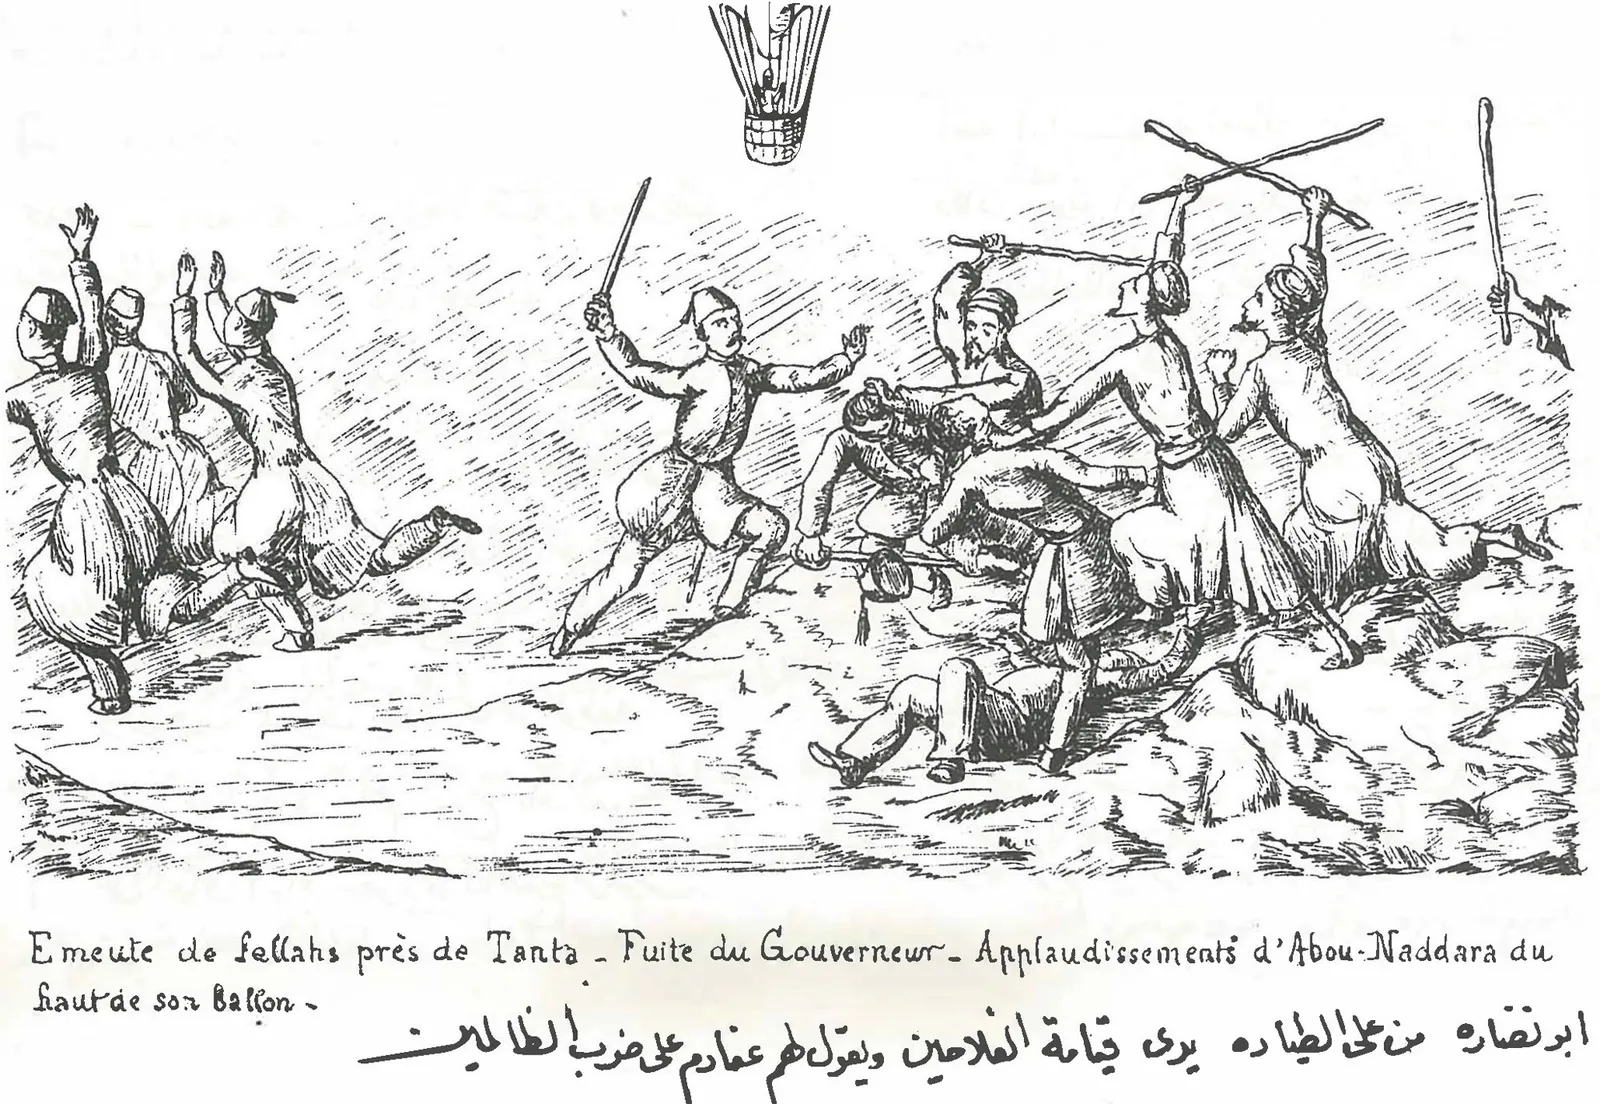 A cartoon from the February 18, 1881, issue reads, “Abou Naddara applauds from his balloon as the peasants rise up against their tyrannical rulers.” 